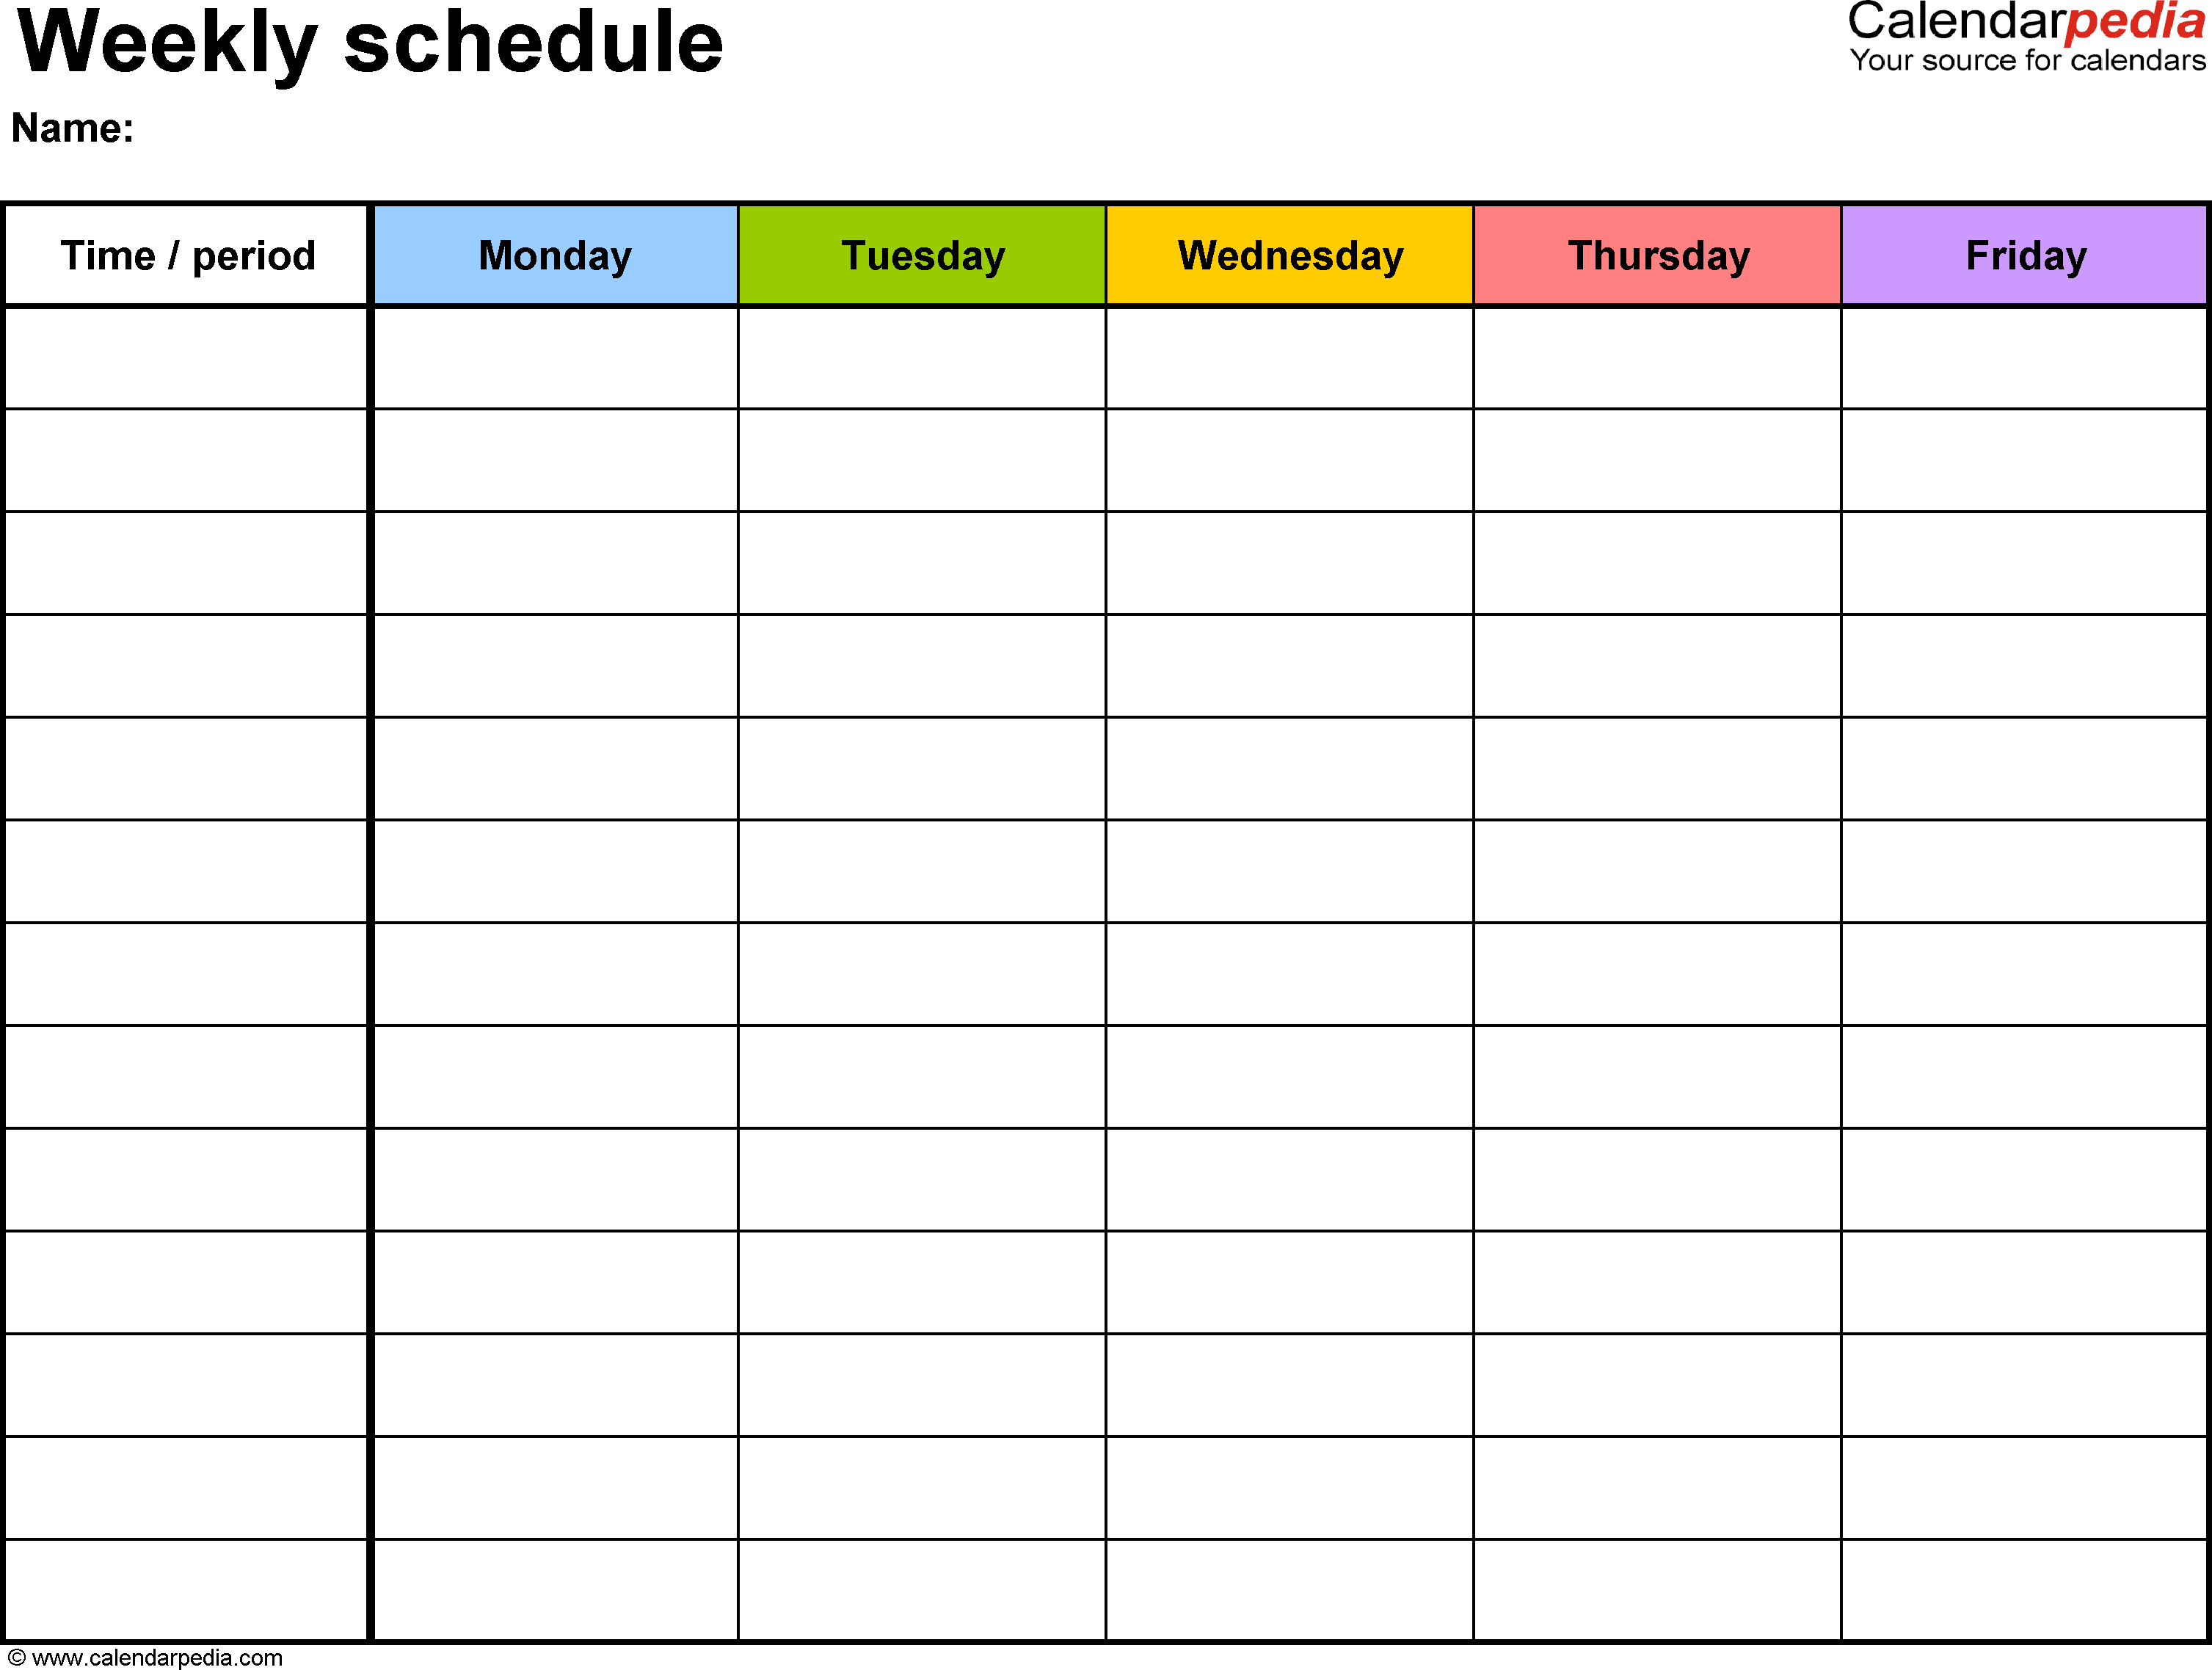 Free Weekly Schedule Templates For Excel - 18 Templates In Microsoft Word Spreadsheet Download